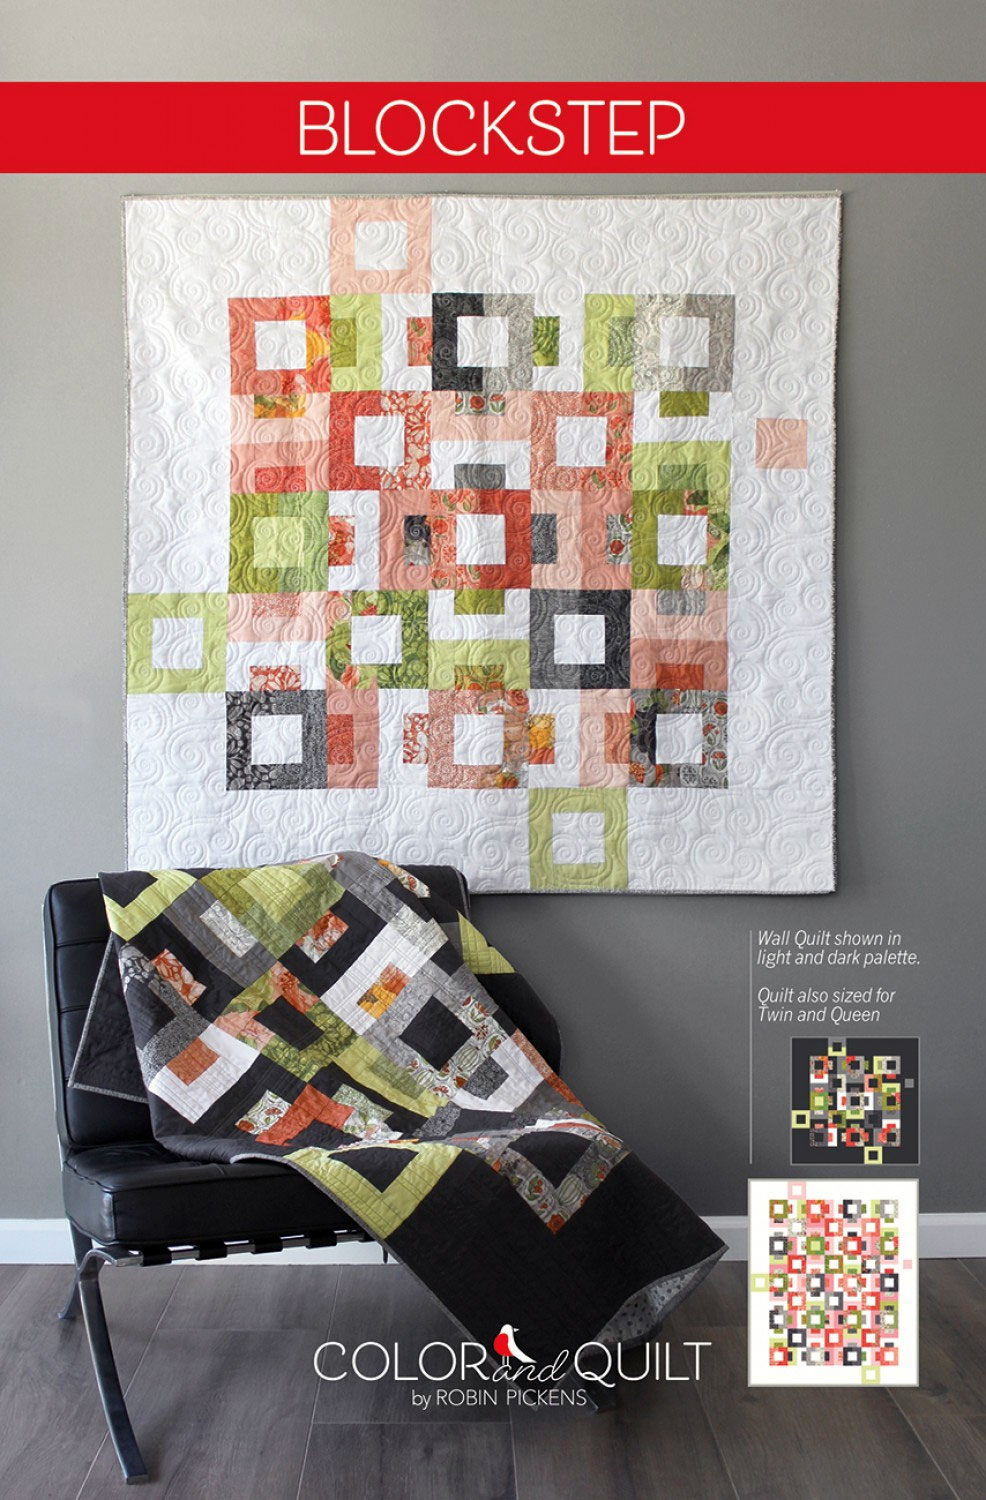 Blockstep-quilt-sewing-pattern-color-and-quilt-front